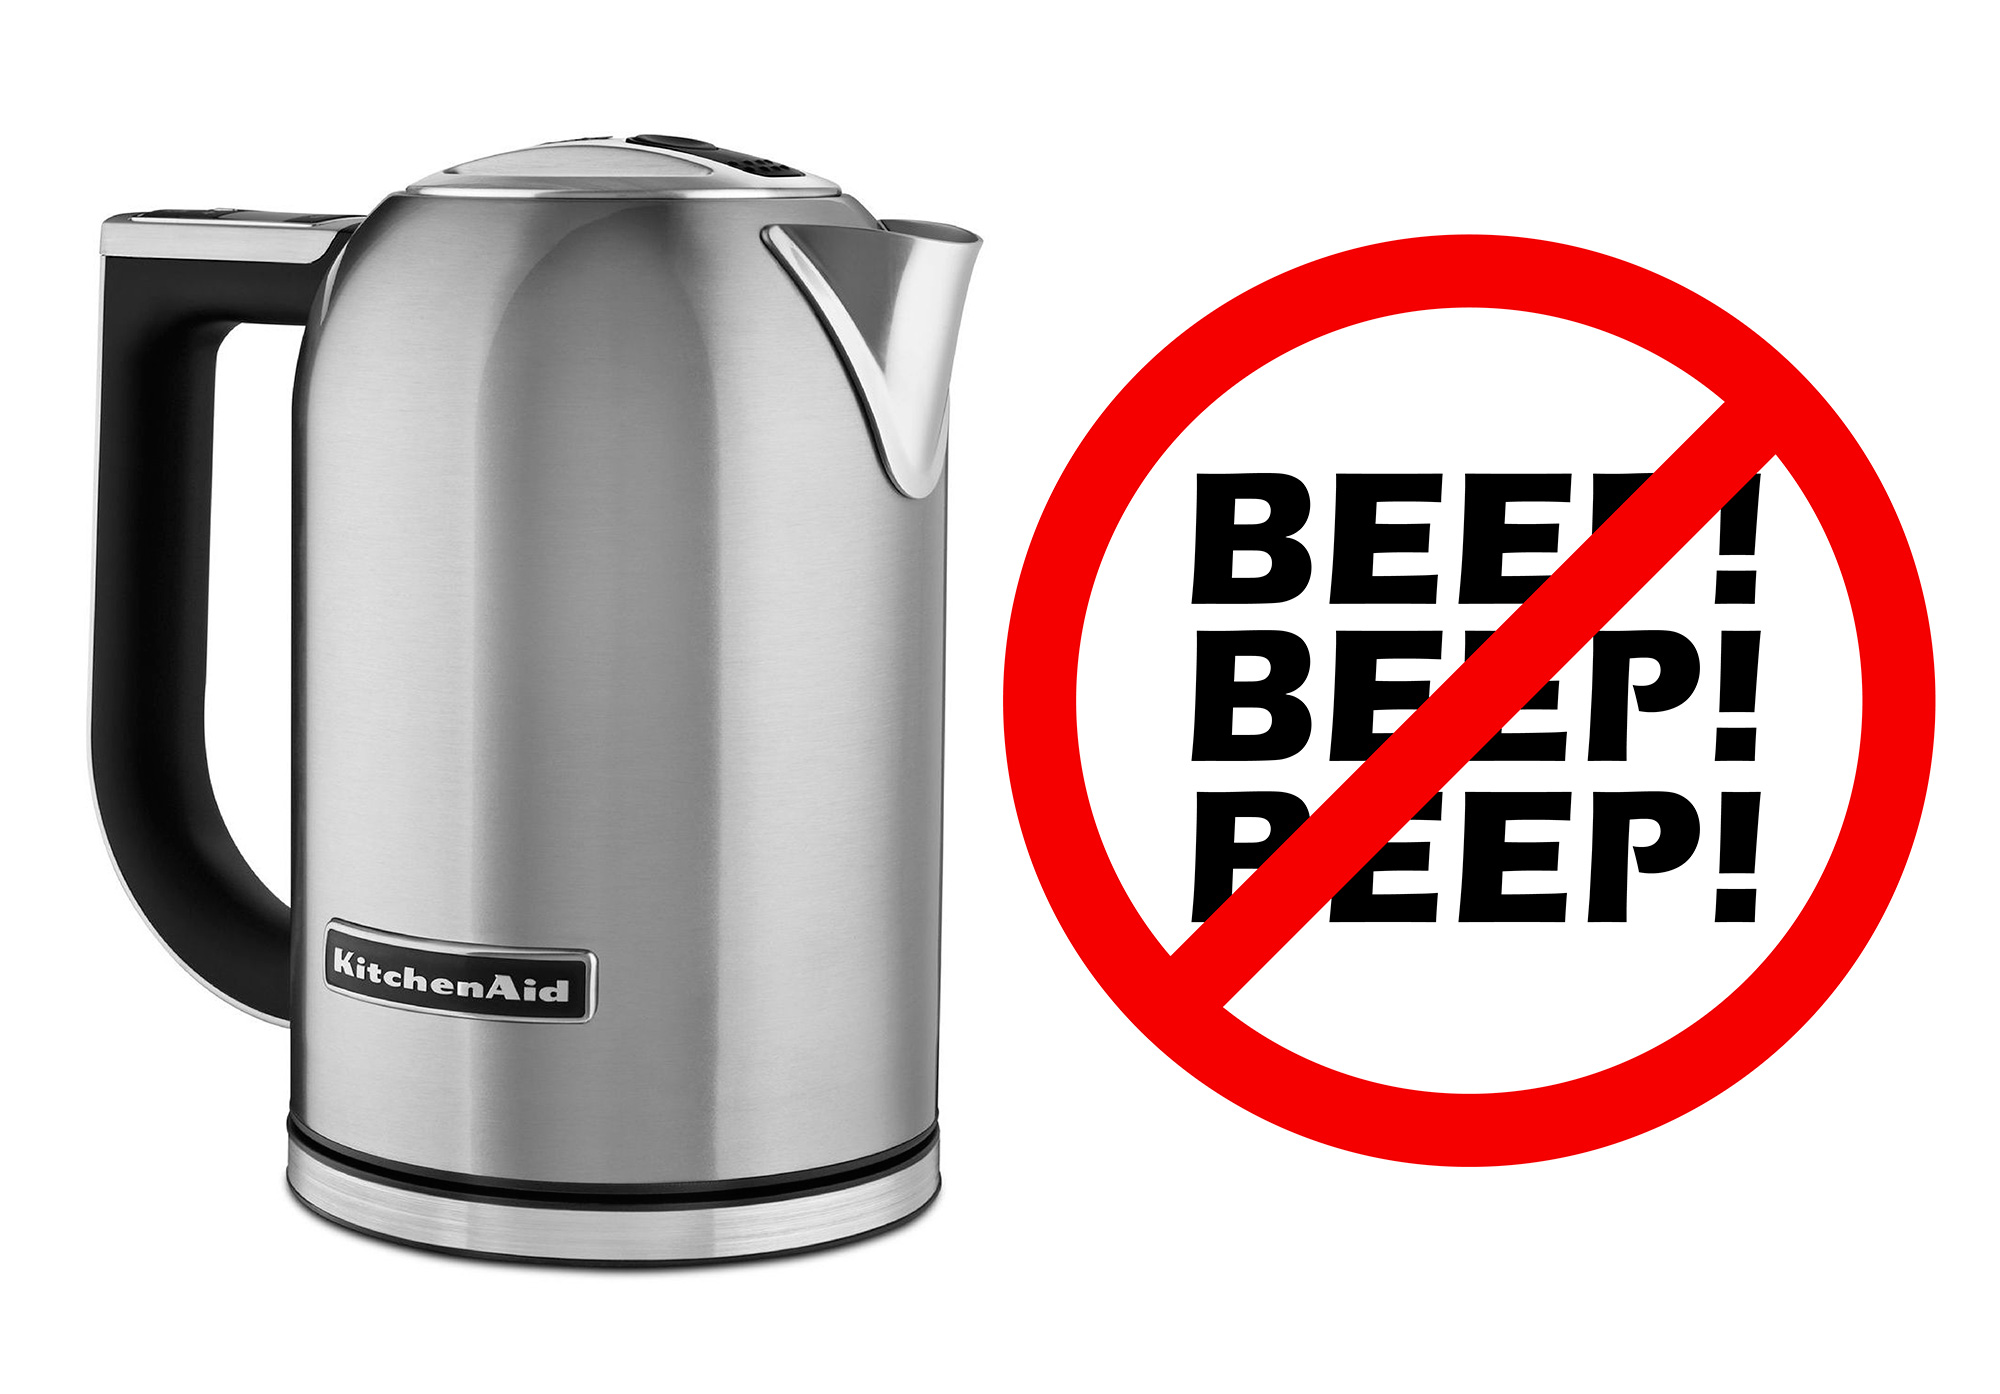 De-Beeping a KitchenAid Kettle – Once Around the Block